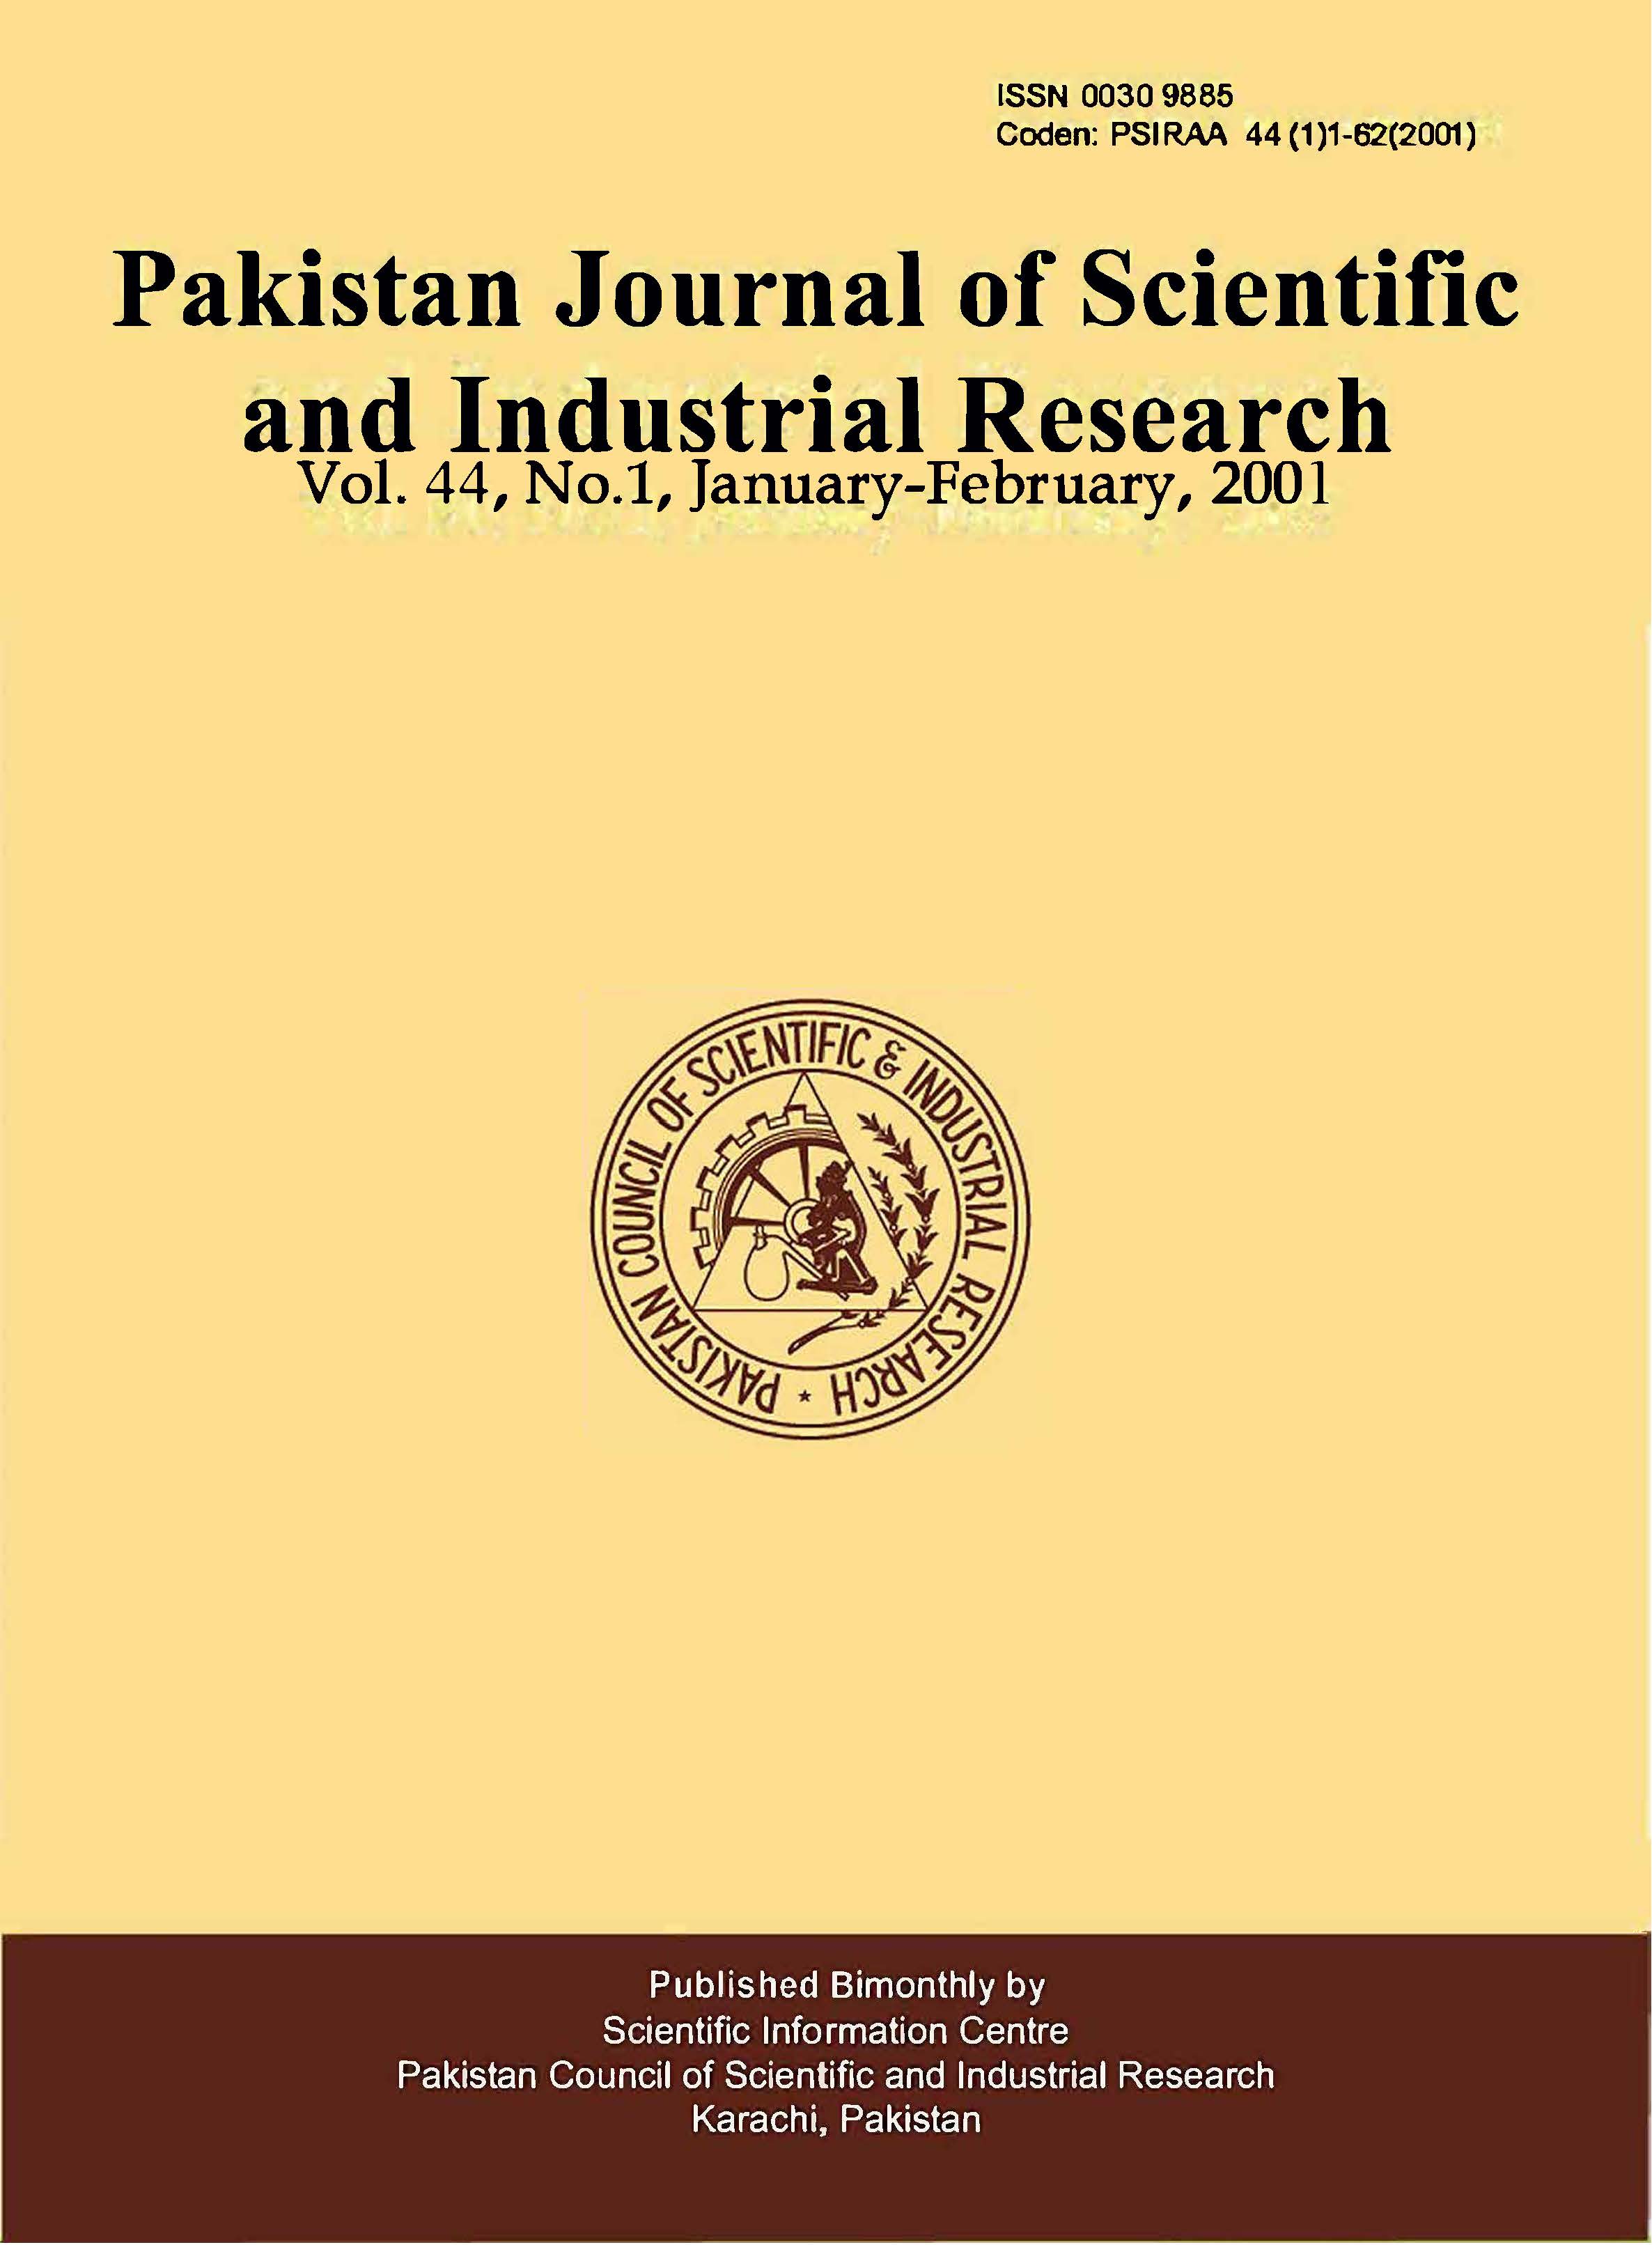 					View Vol. 44 No. 1 (2001): Pakistan Journal of Scientific and Industrial Research
				